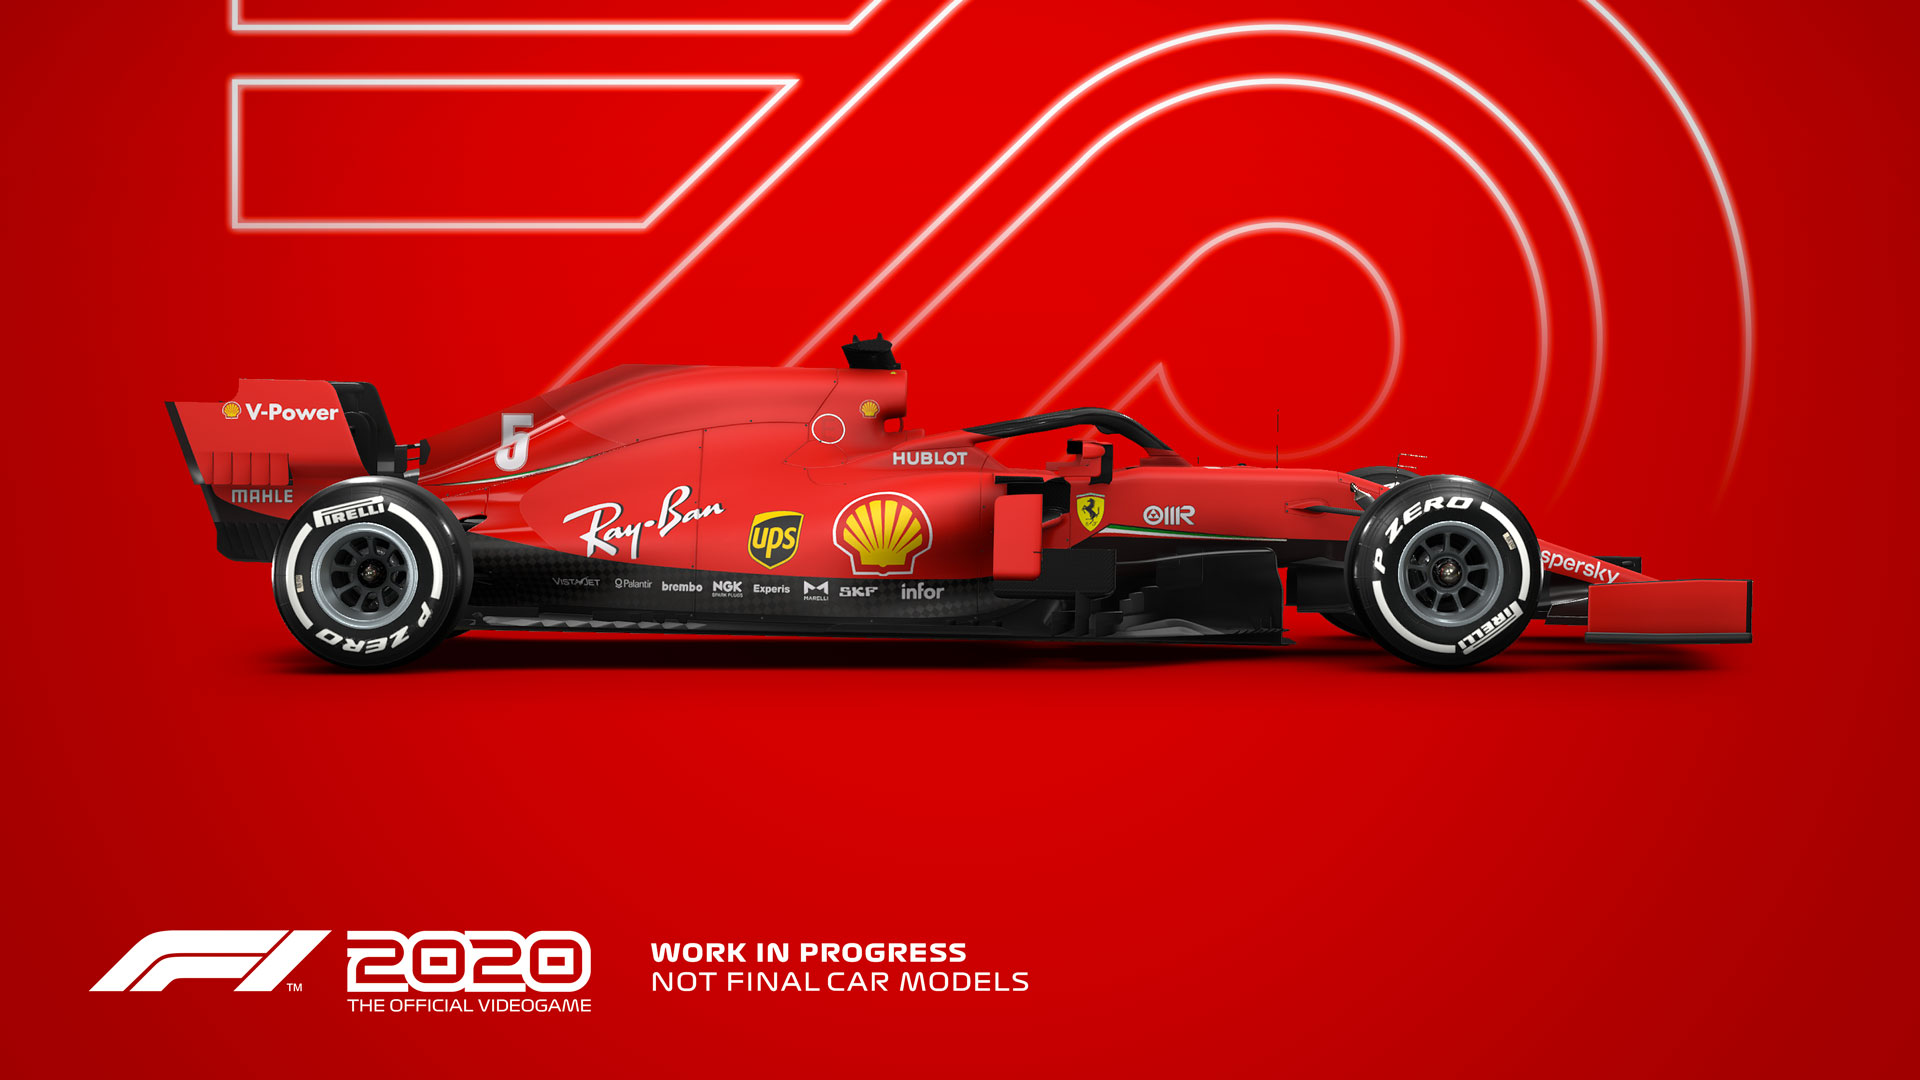 f1 2016 for mac